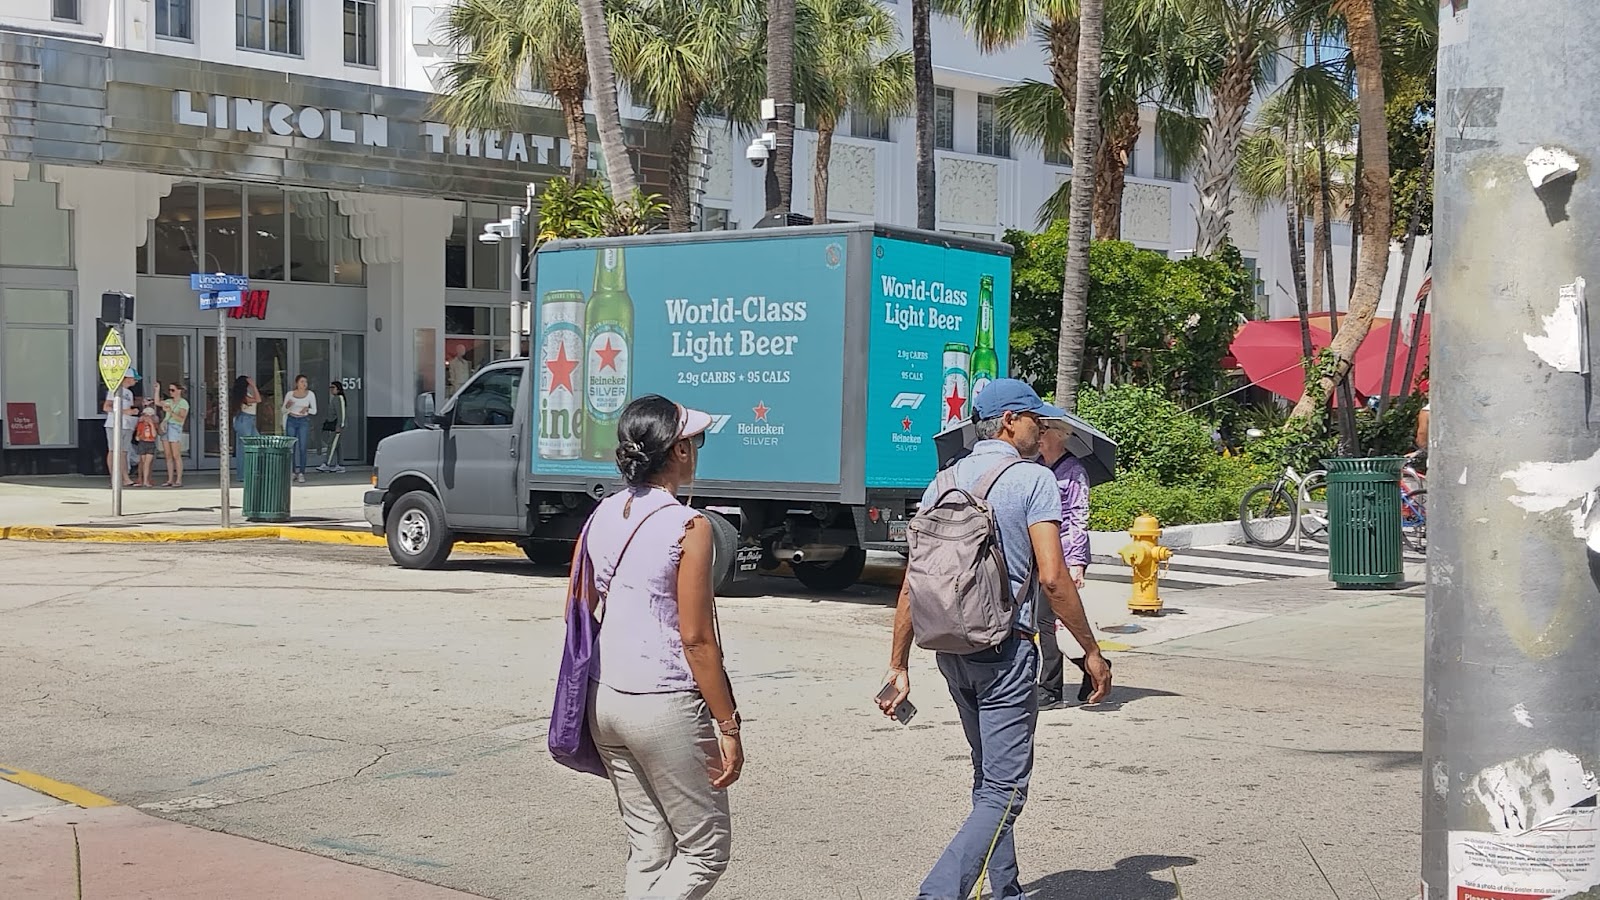 Digital Billboard Truck for Heineken beer advertisement parked by the sidewalk in front of Lincoln Theatre in sunny Miami, Florida.